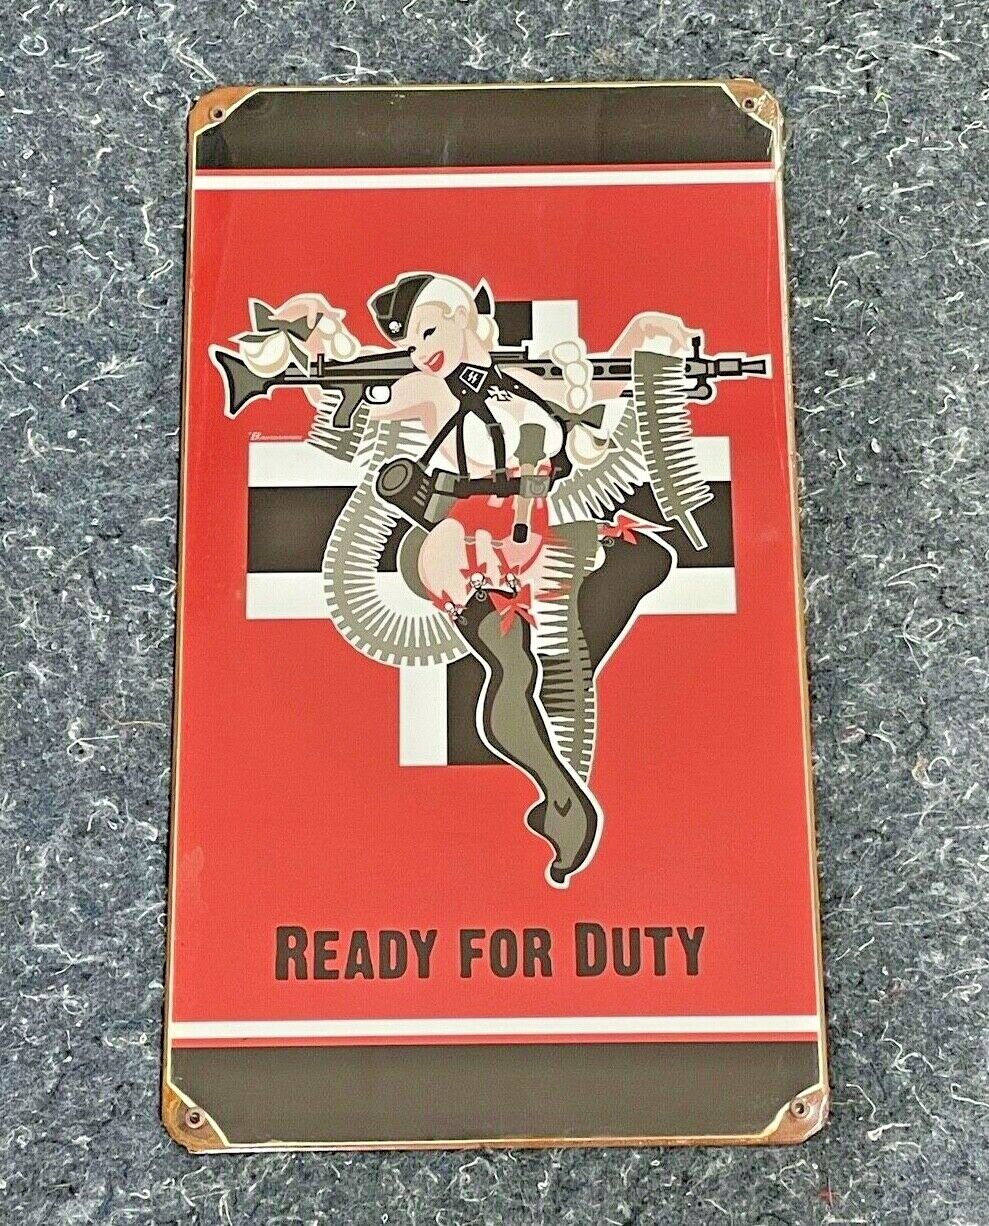 GERMAN READY FOR DUTY MG34 MG43 14 X 8 VINTAGE STYLE METAL SIGN